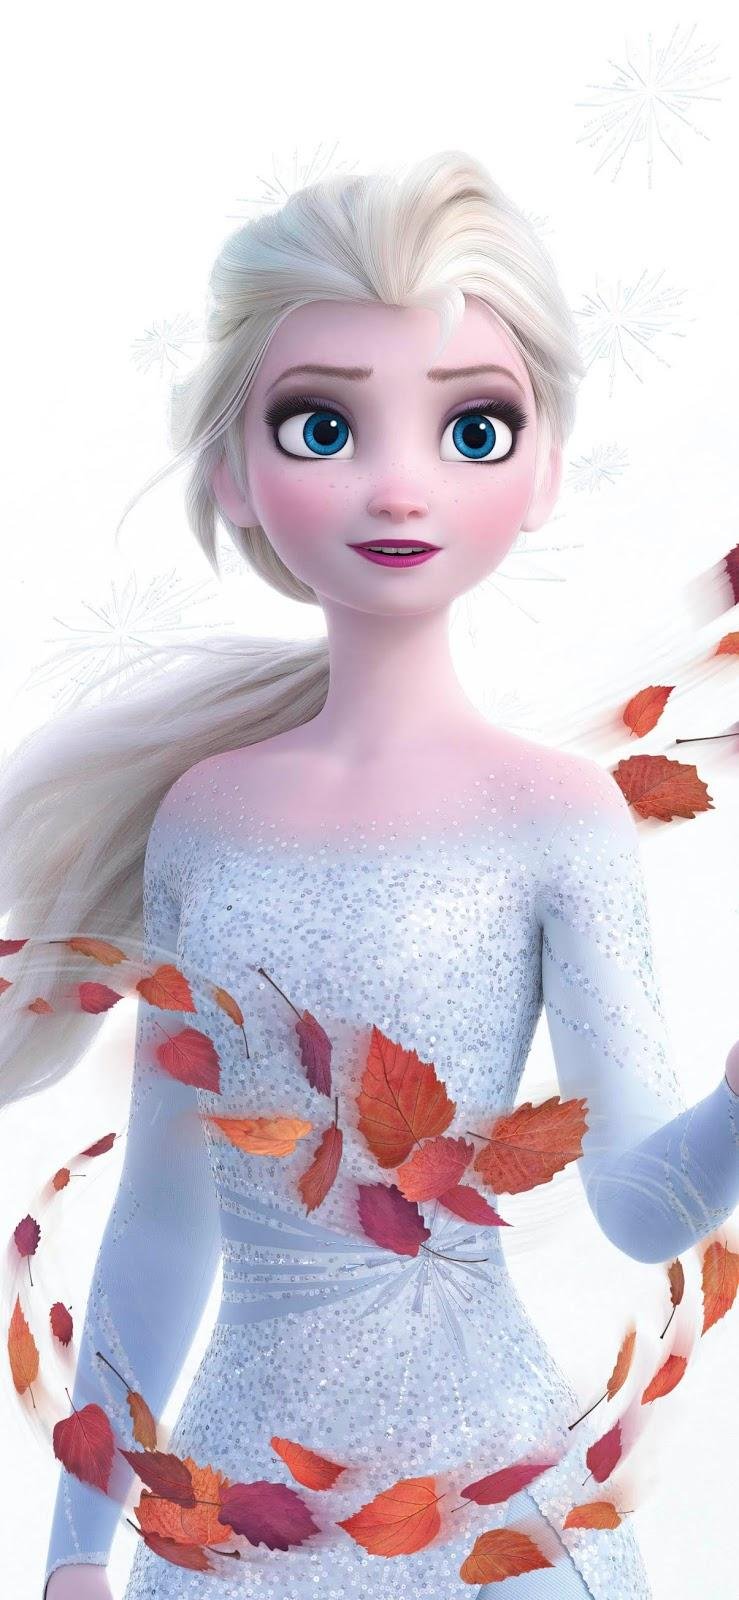 15 new Frozen 2 HD wallpapers with Elsa in white dress and her hair down   desktop and mobile  YouLoveItcom